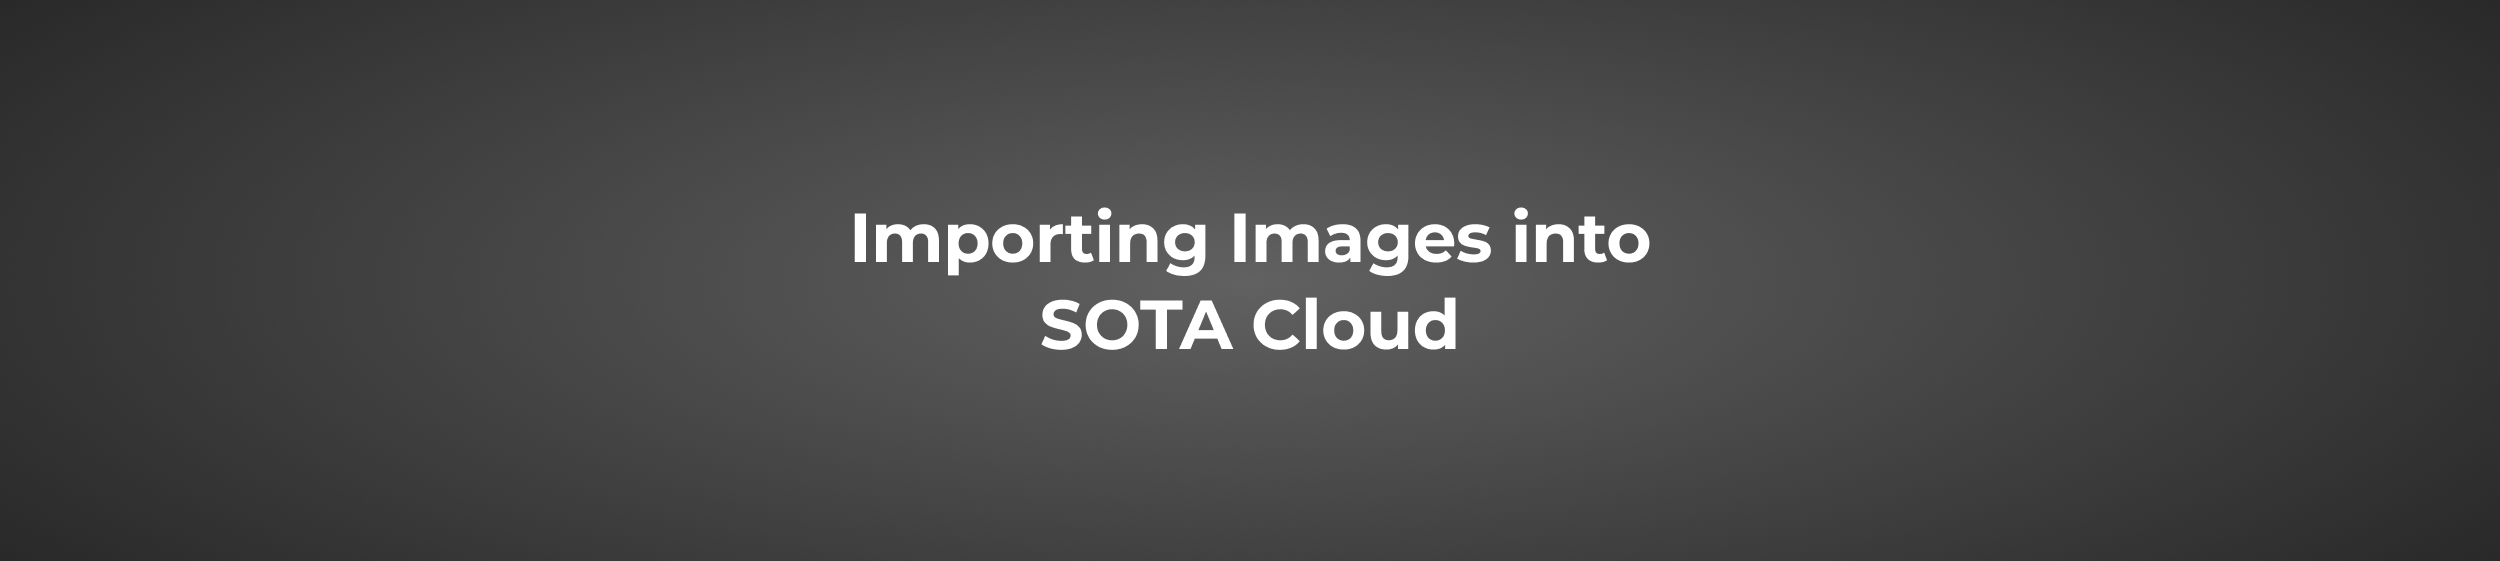 Importing images into SOTA Cloud dental imaging software